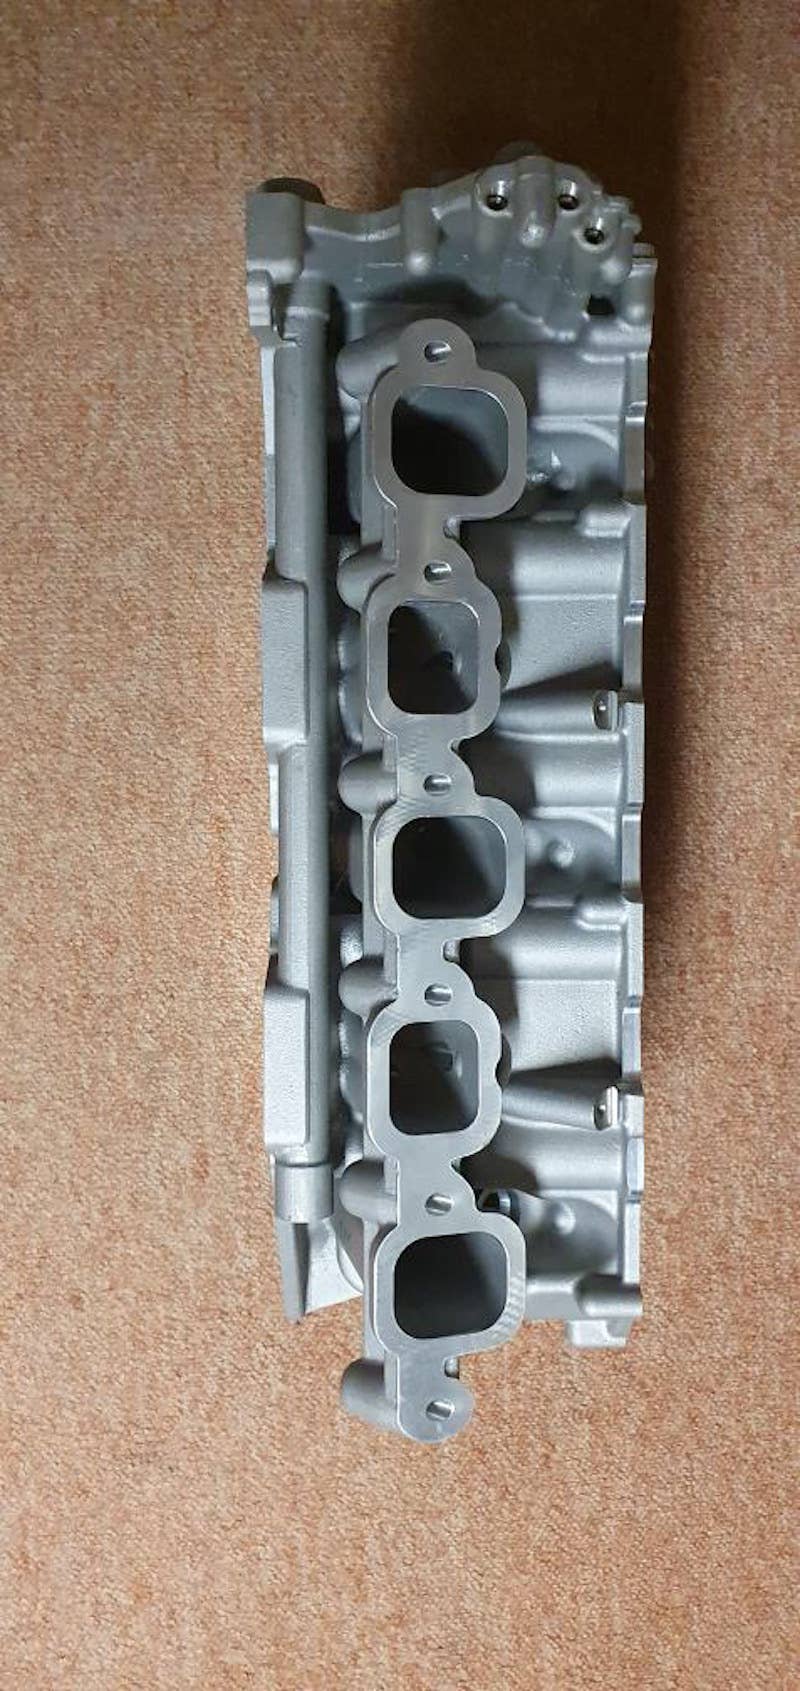 Volkswagen W10 engine prototype intake manifold with staggered intake port sizes